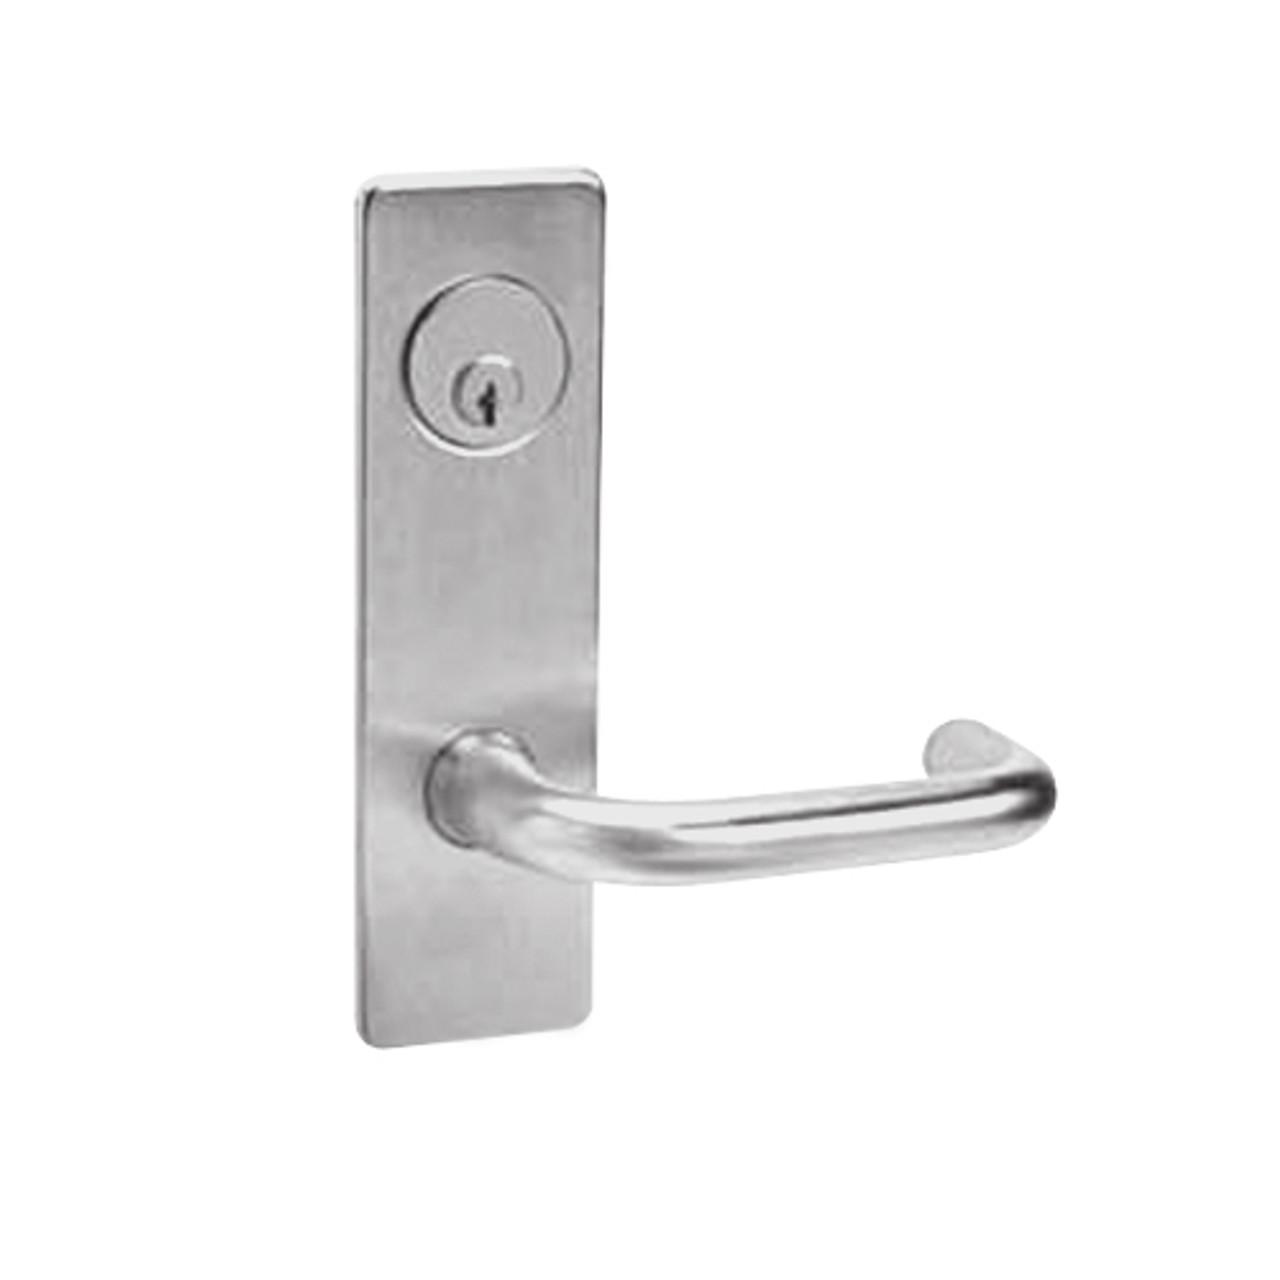 ML2059-LWP-630 Corbin Russwin ML2000 Series Mortise Security Storeroom Locksets with Lustra Lever and Deadbolt in Satin Stainless